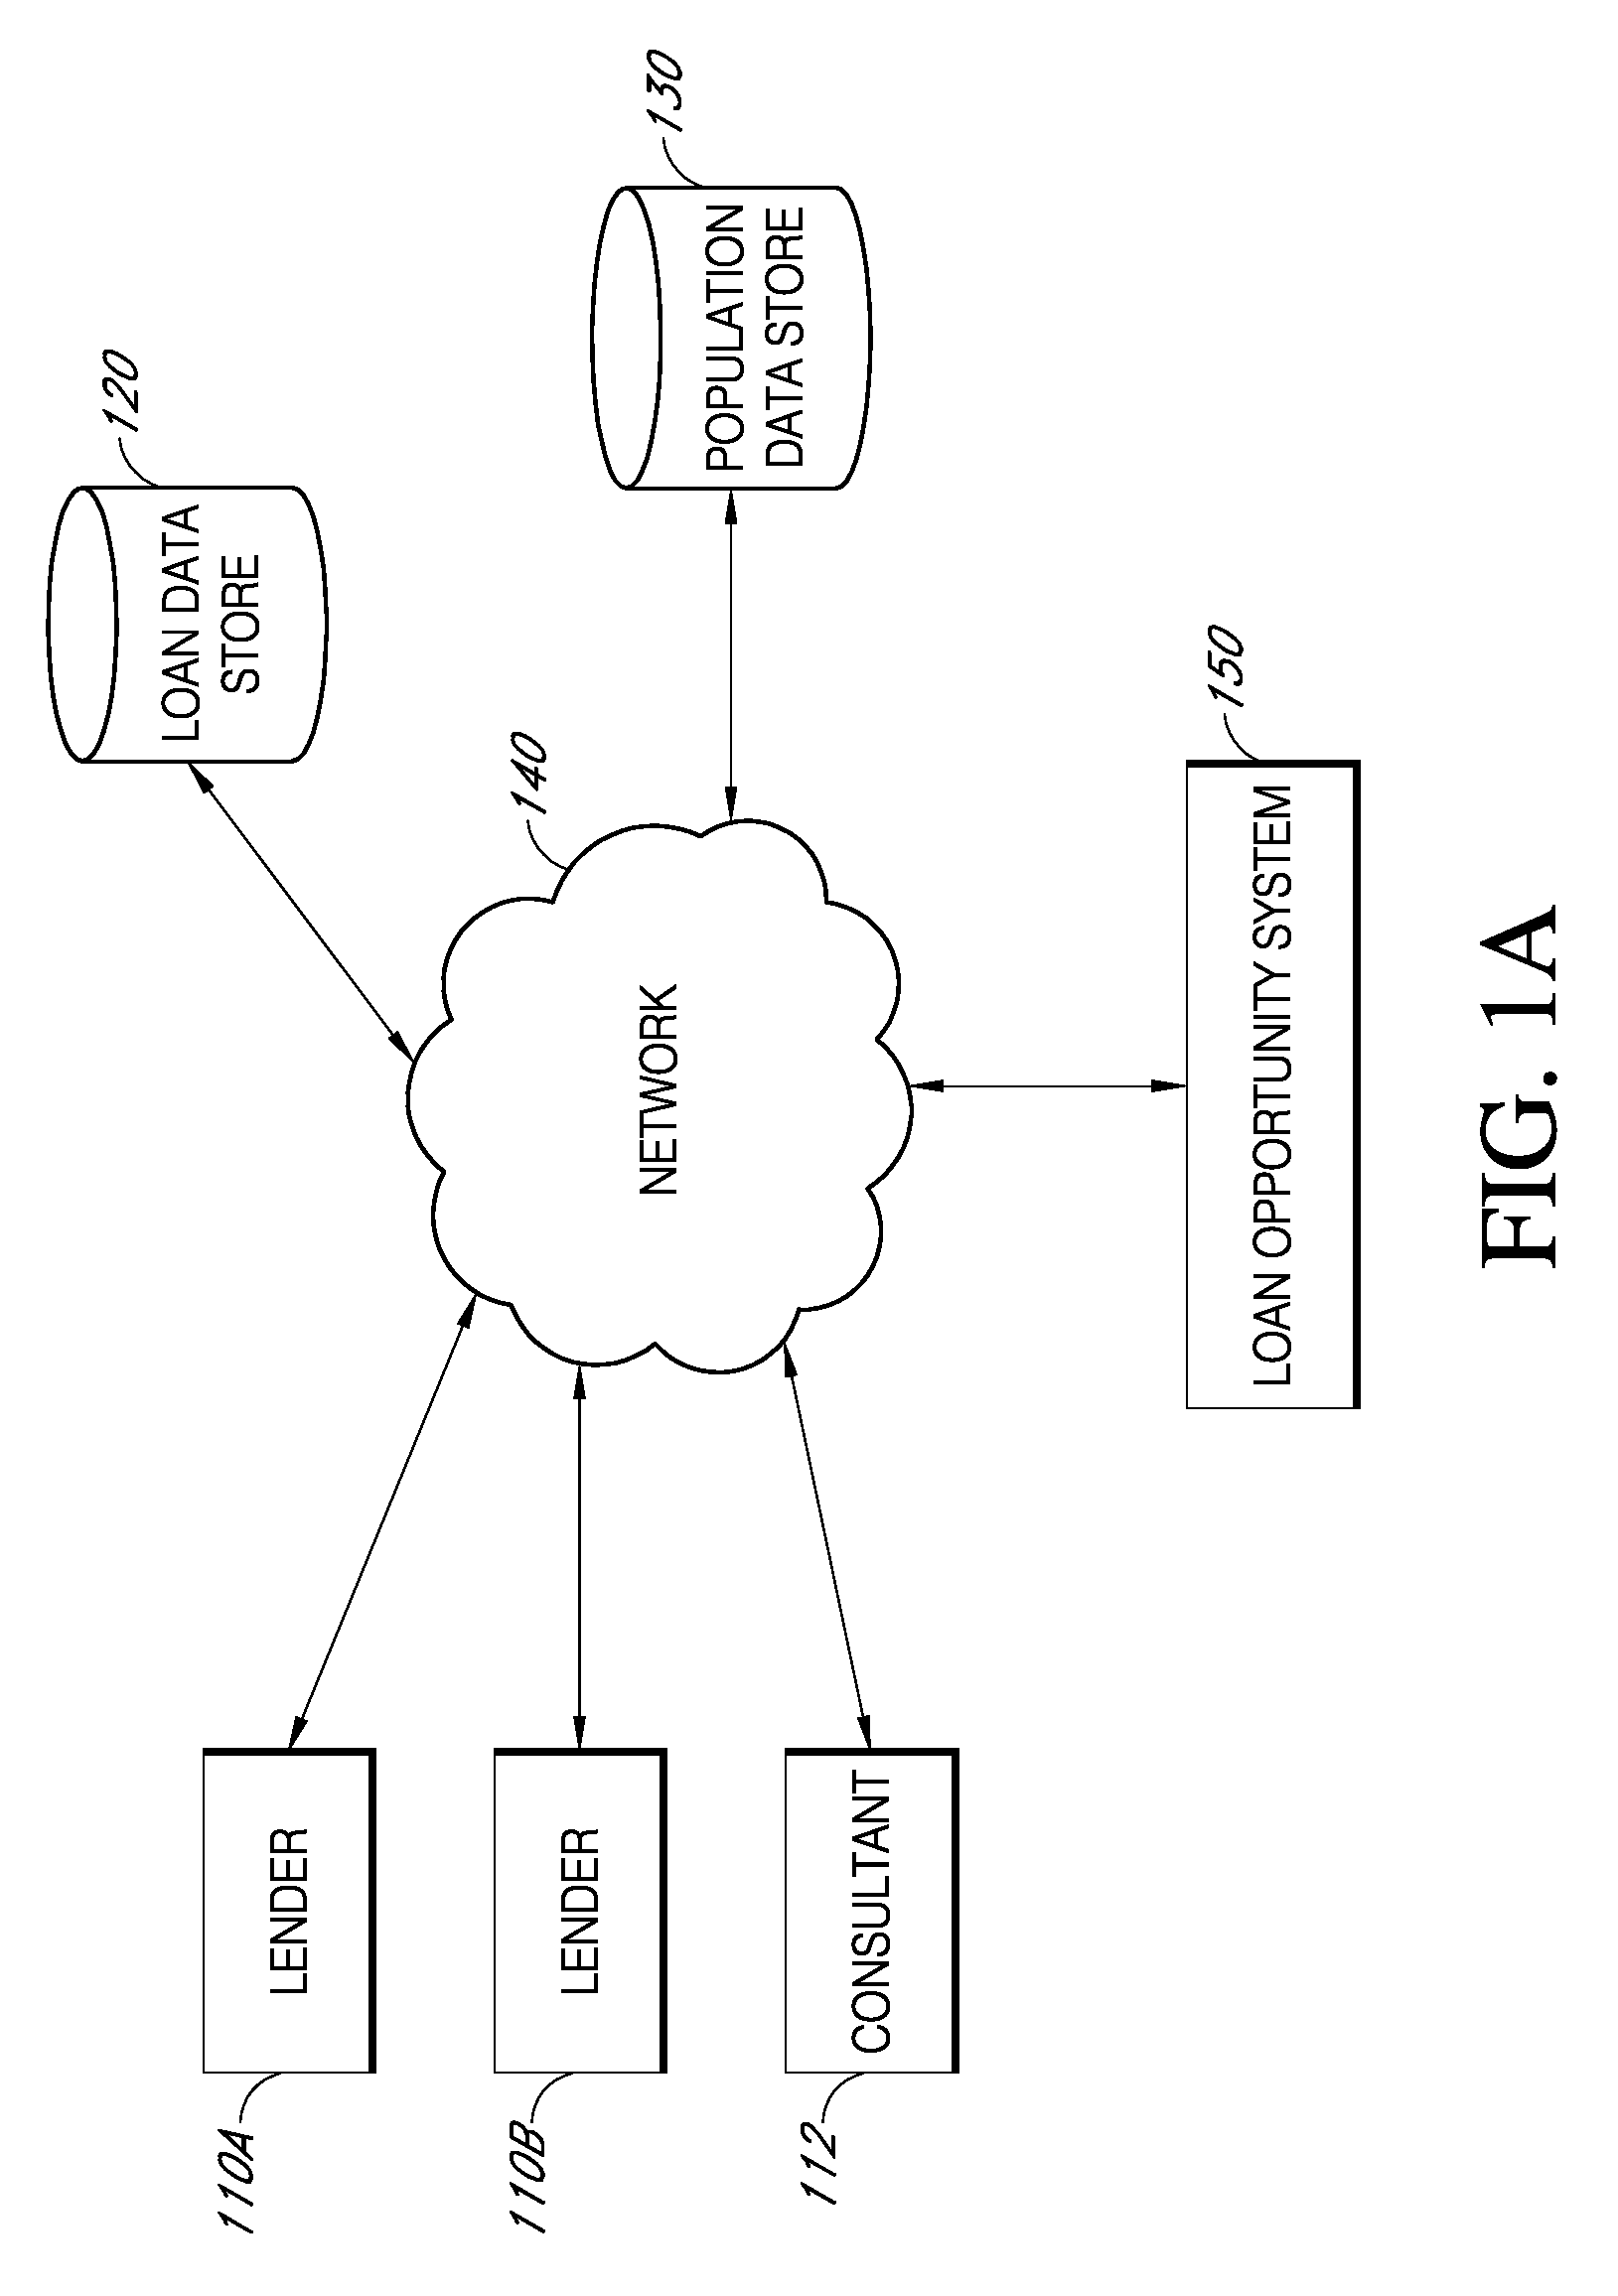 Systems and methods for determining loan opportunities